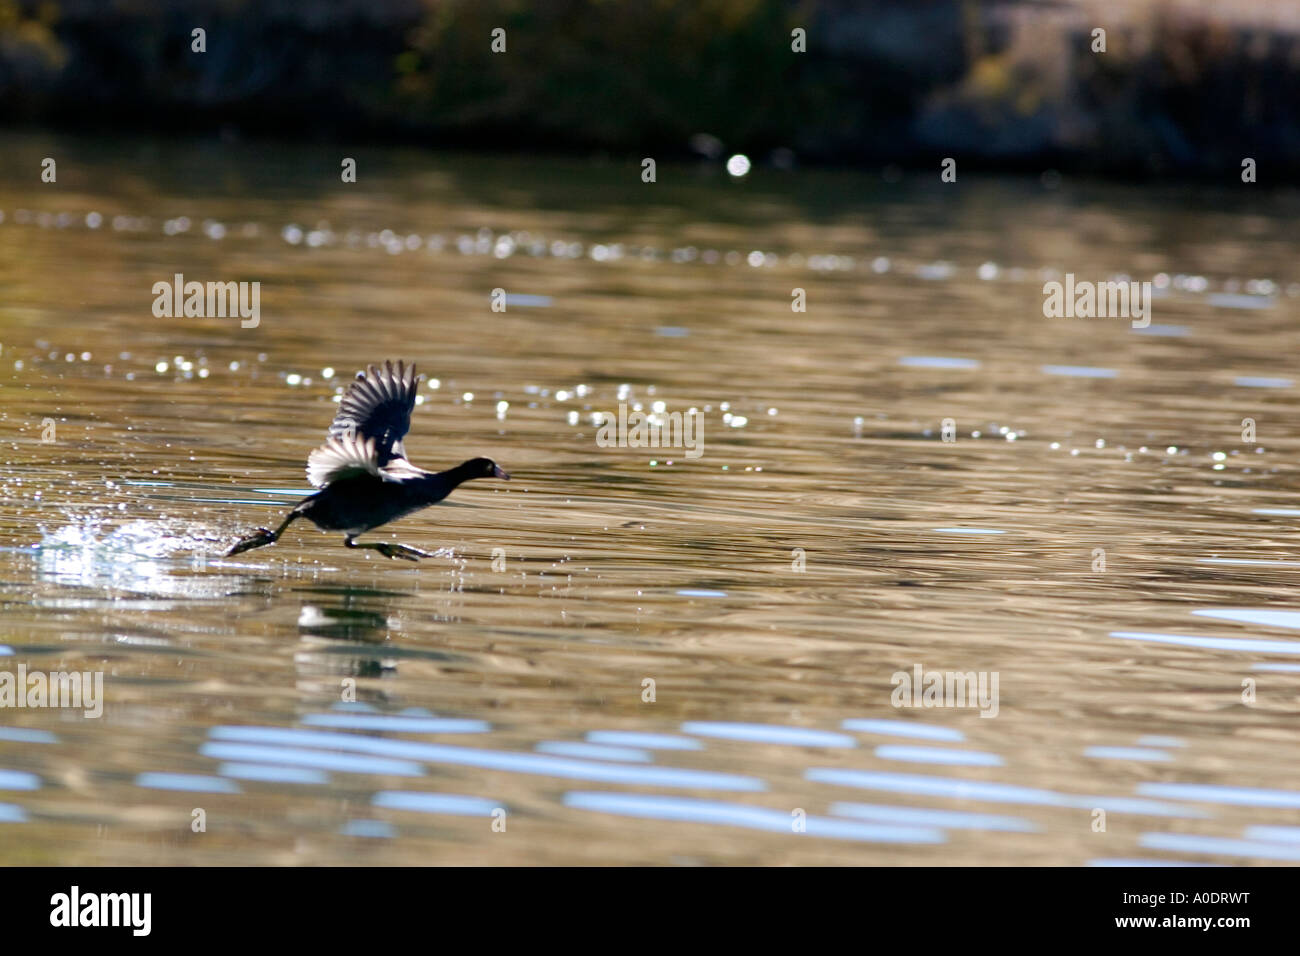 A coot running on the water in Idaho Stock Photo